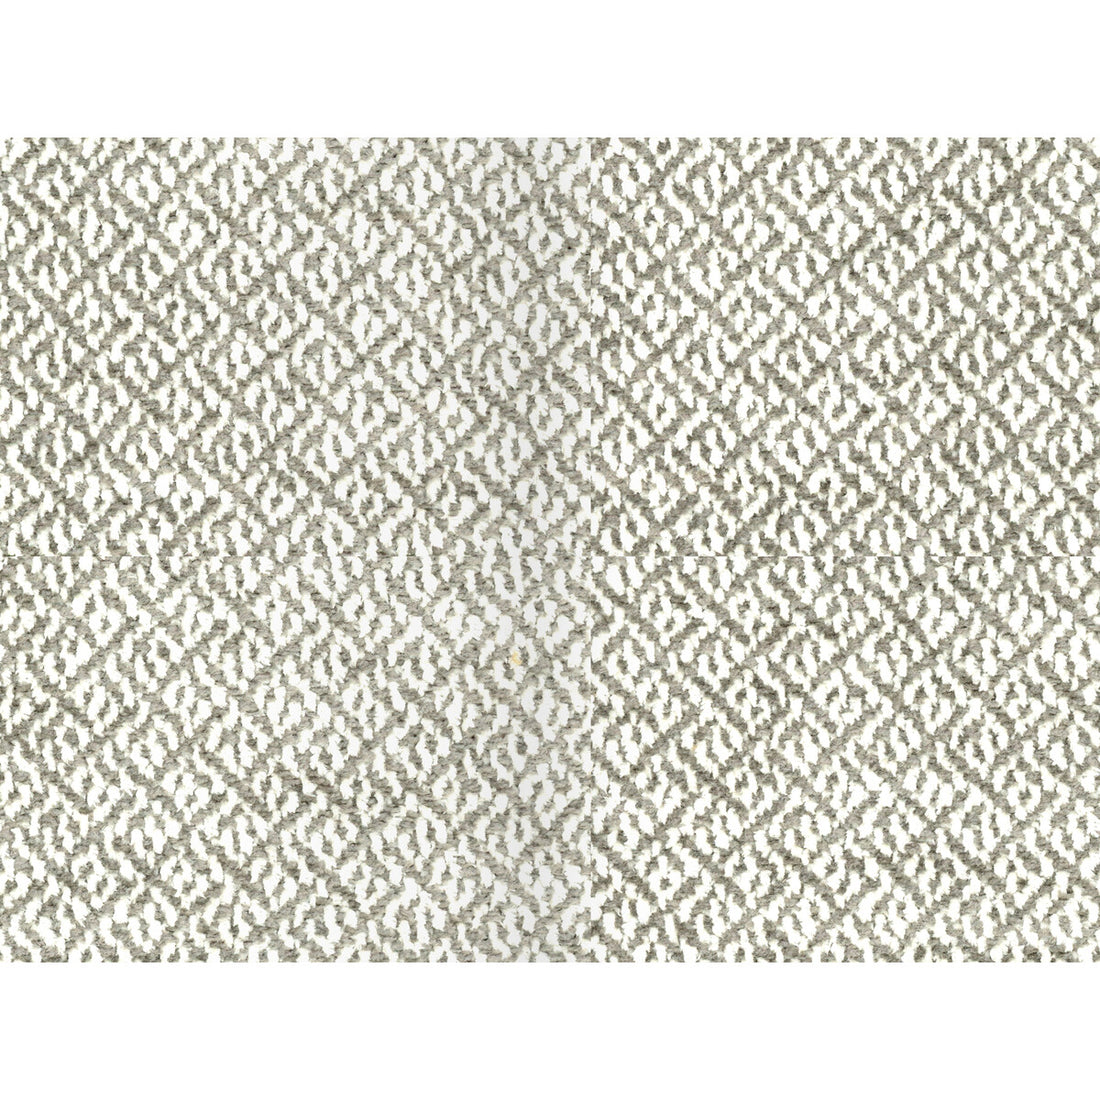 Cottian Chenille fabric in grey color - pattern 8016110.11.0 - by Brunschwig &amp; Fils in the Chambery Textures collection